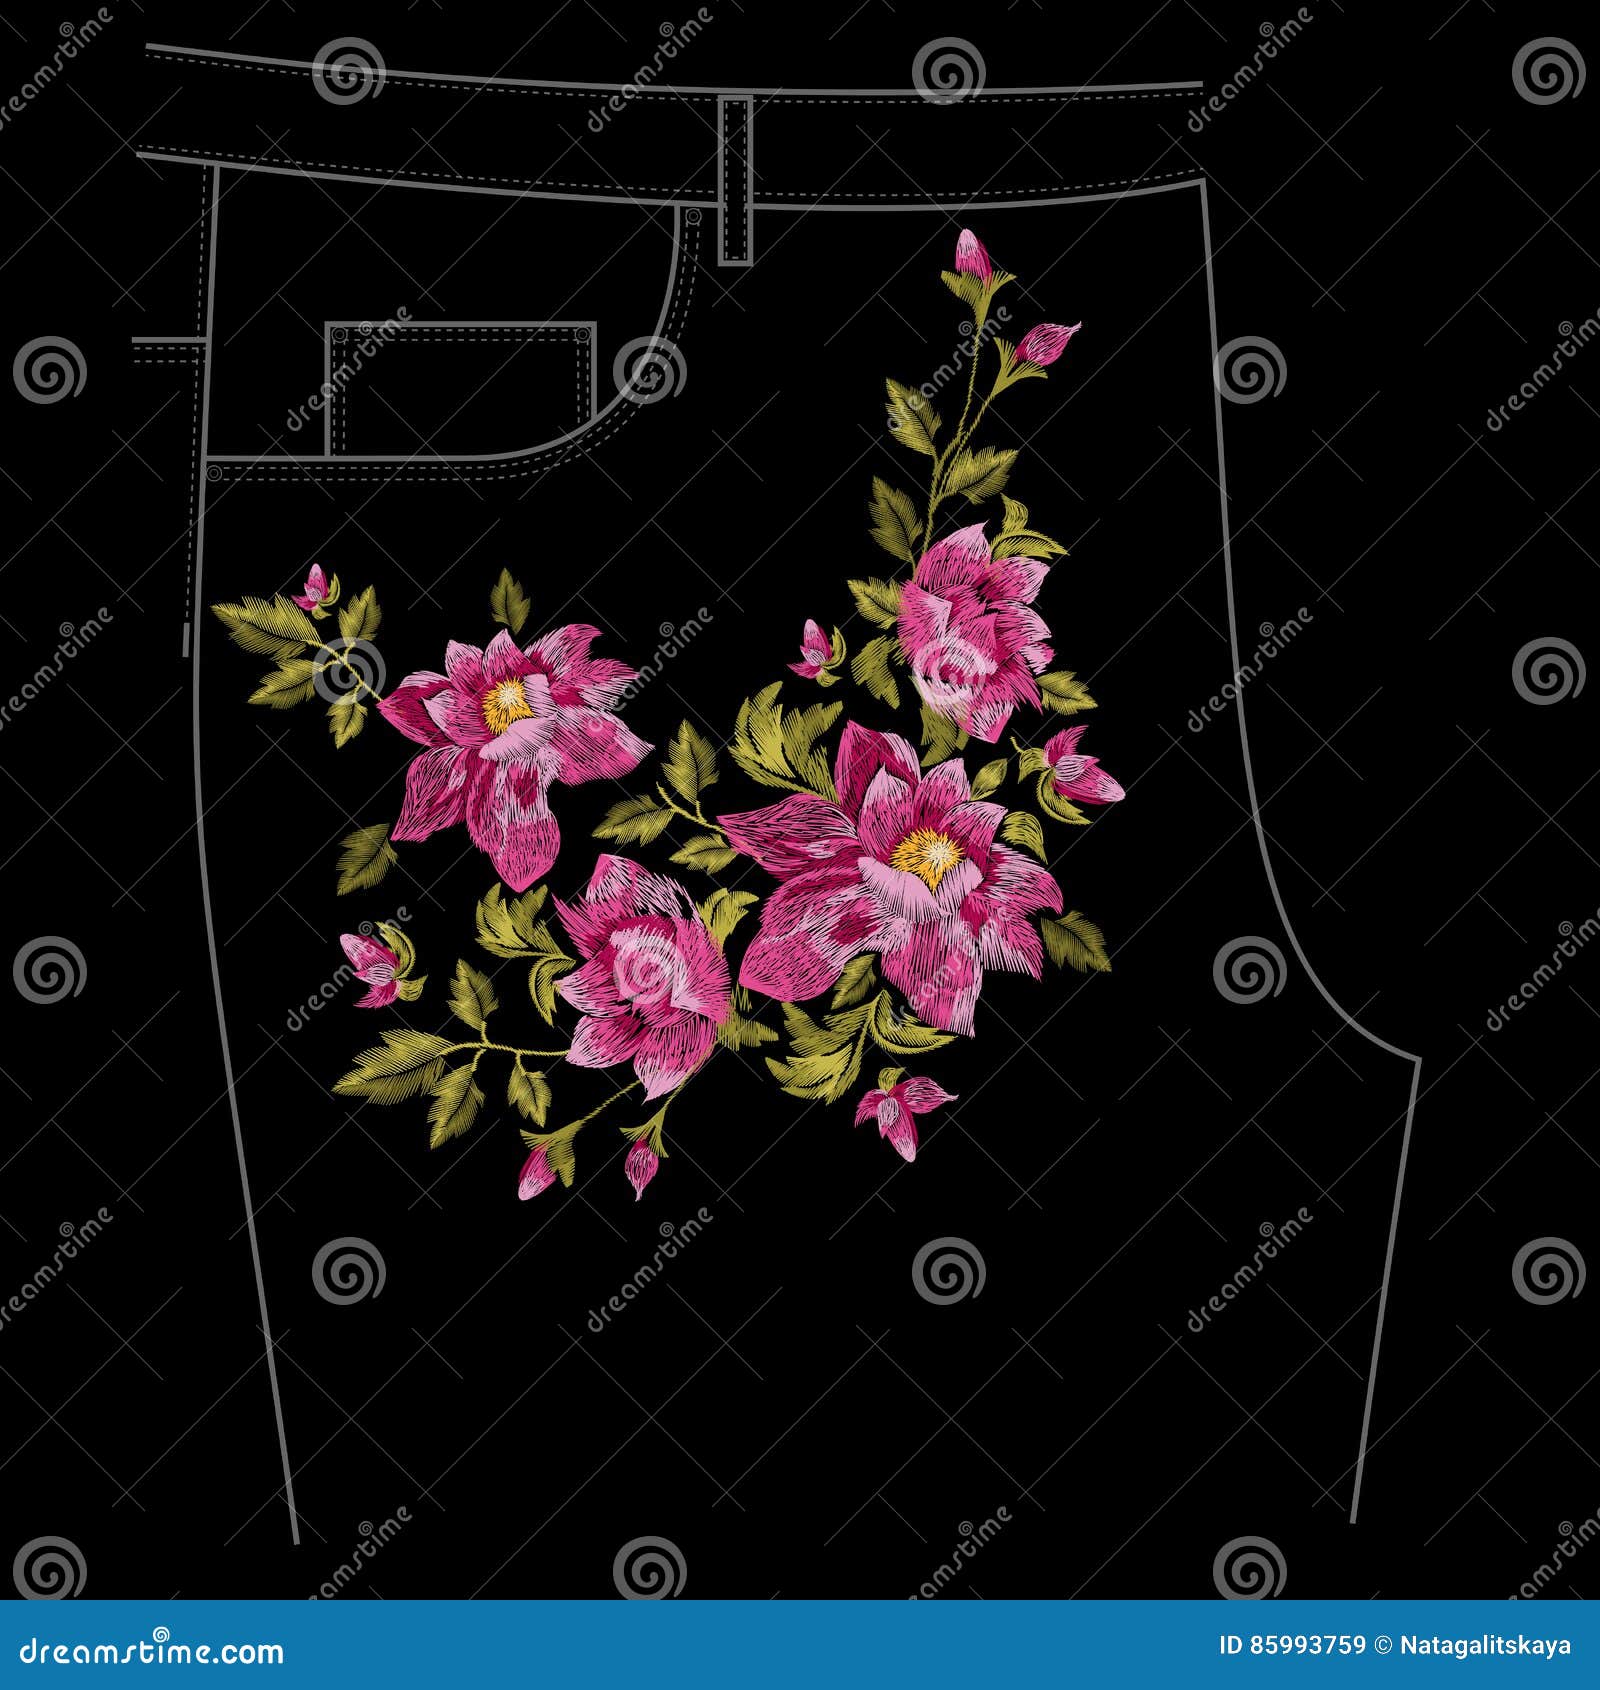 Embroidery Colorful Jeans Floral Pattern with Dog Roses. Stock Vector ...